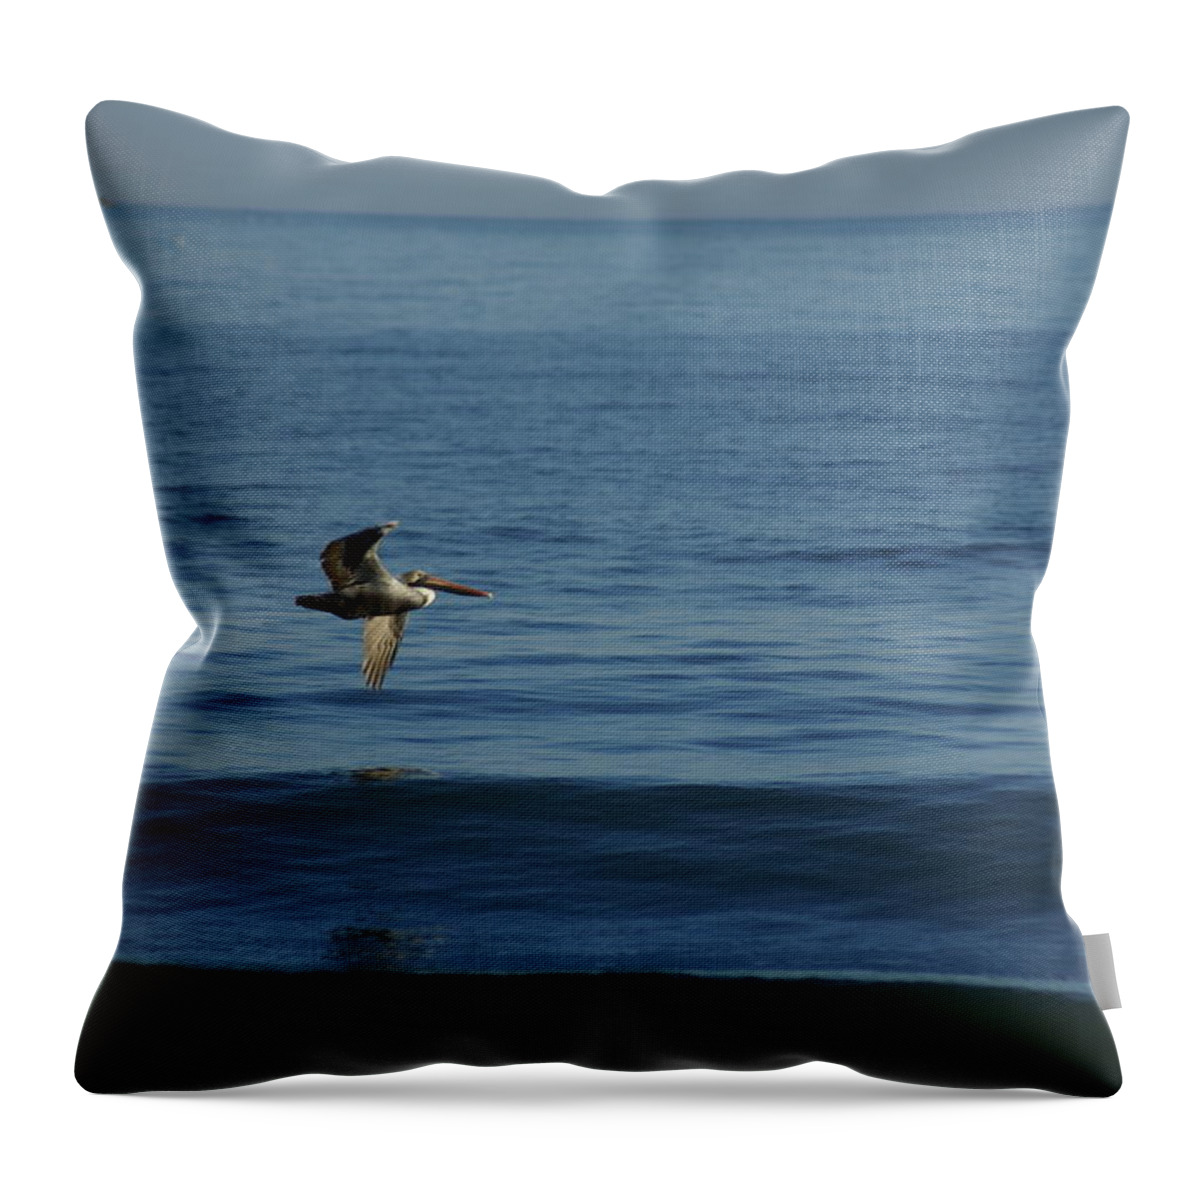  Throw Pillow featuring the photograph Gliding Pelican by Heather E Harman